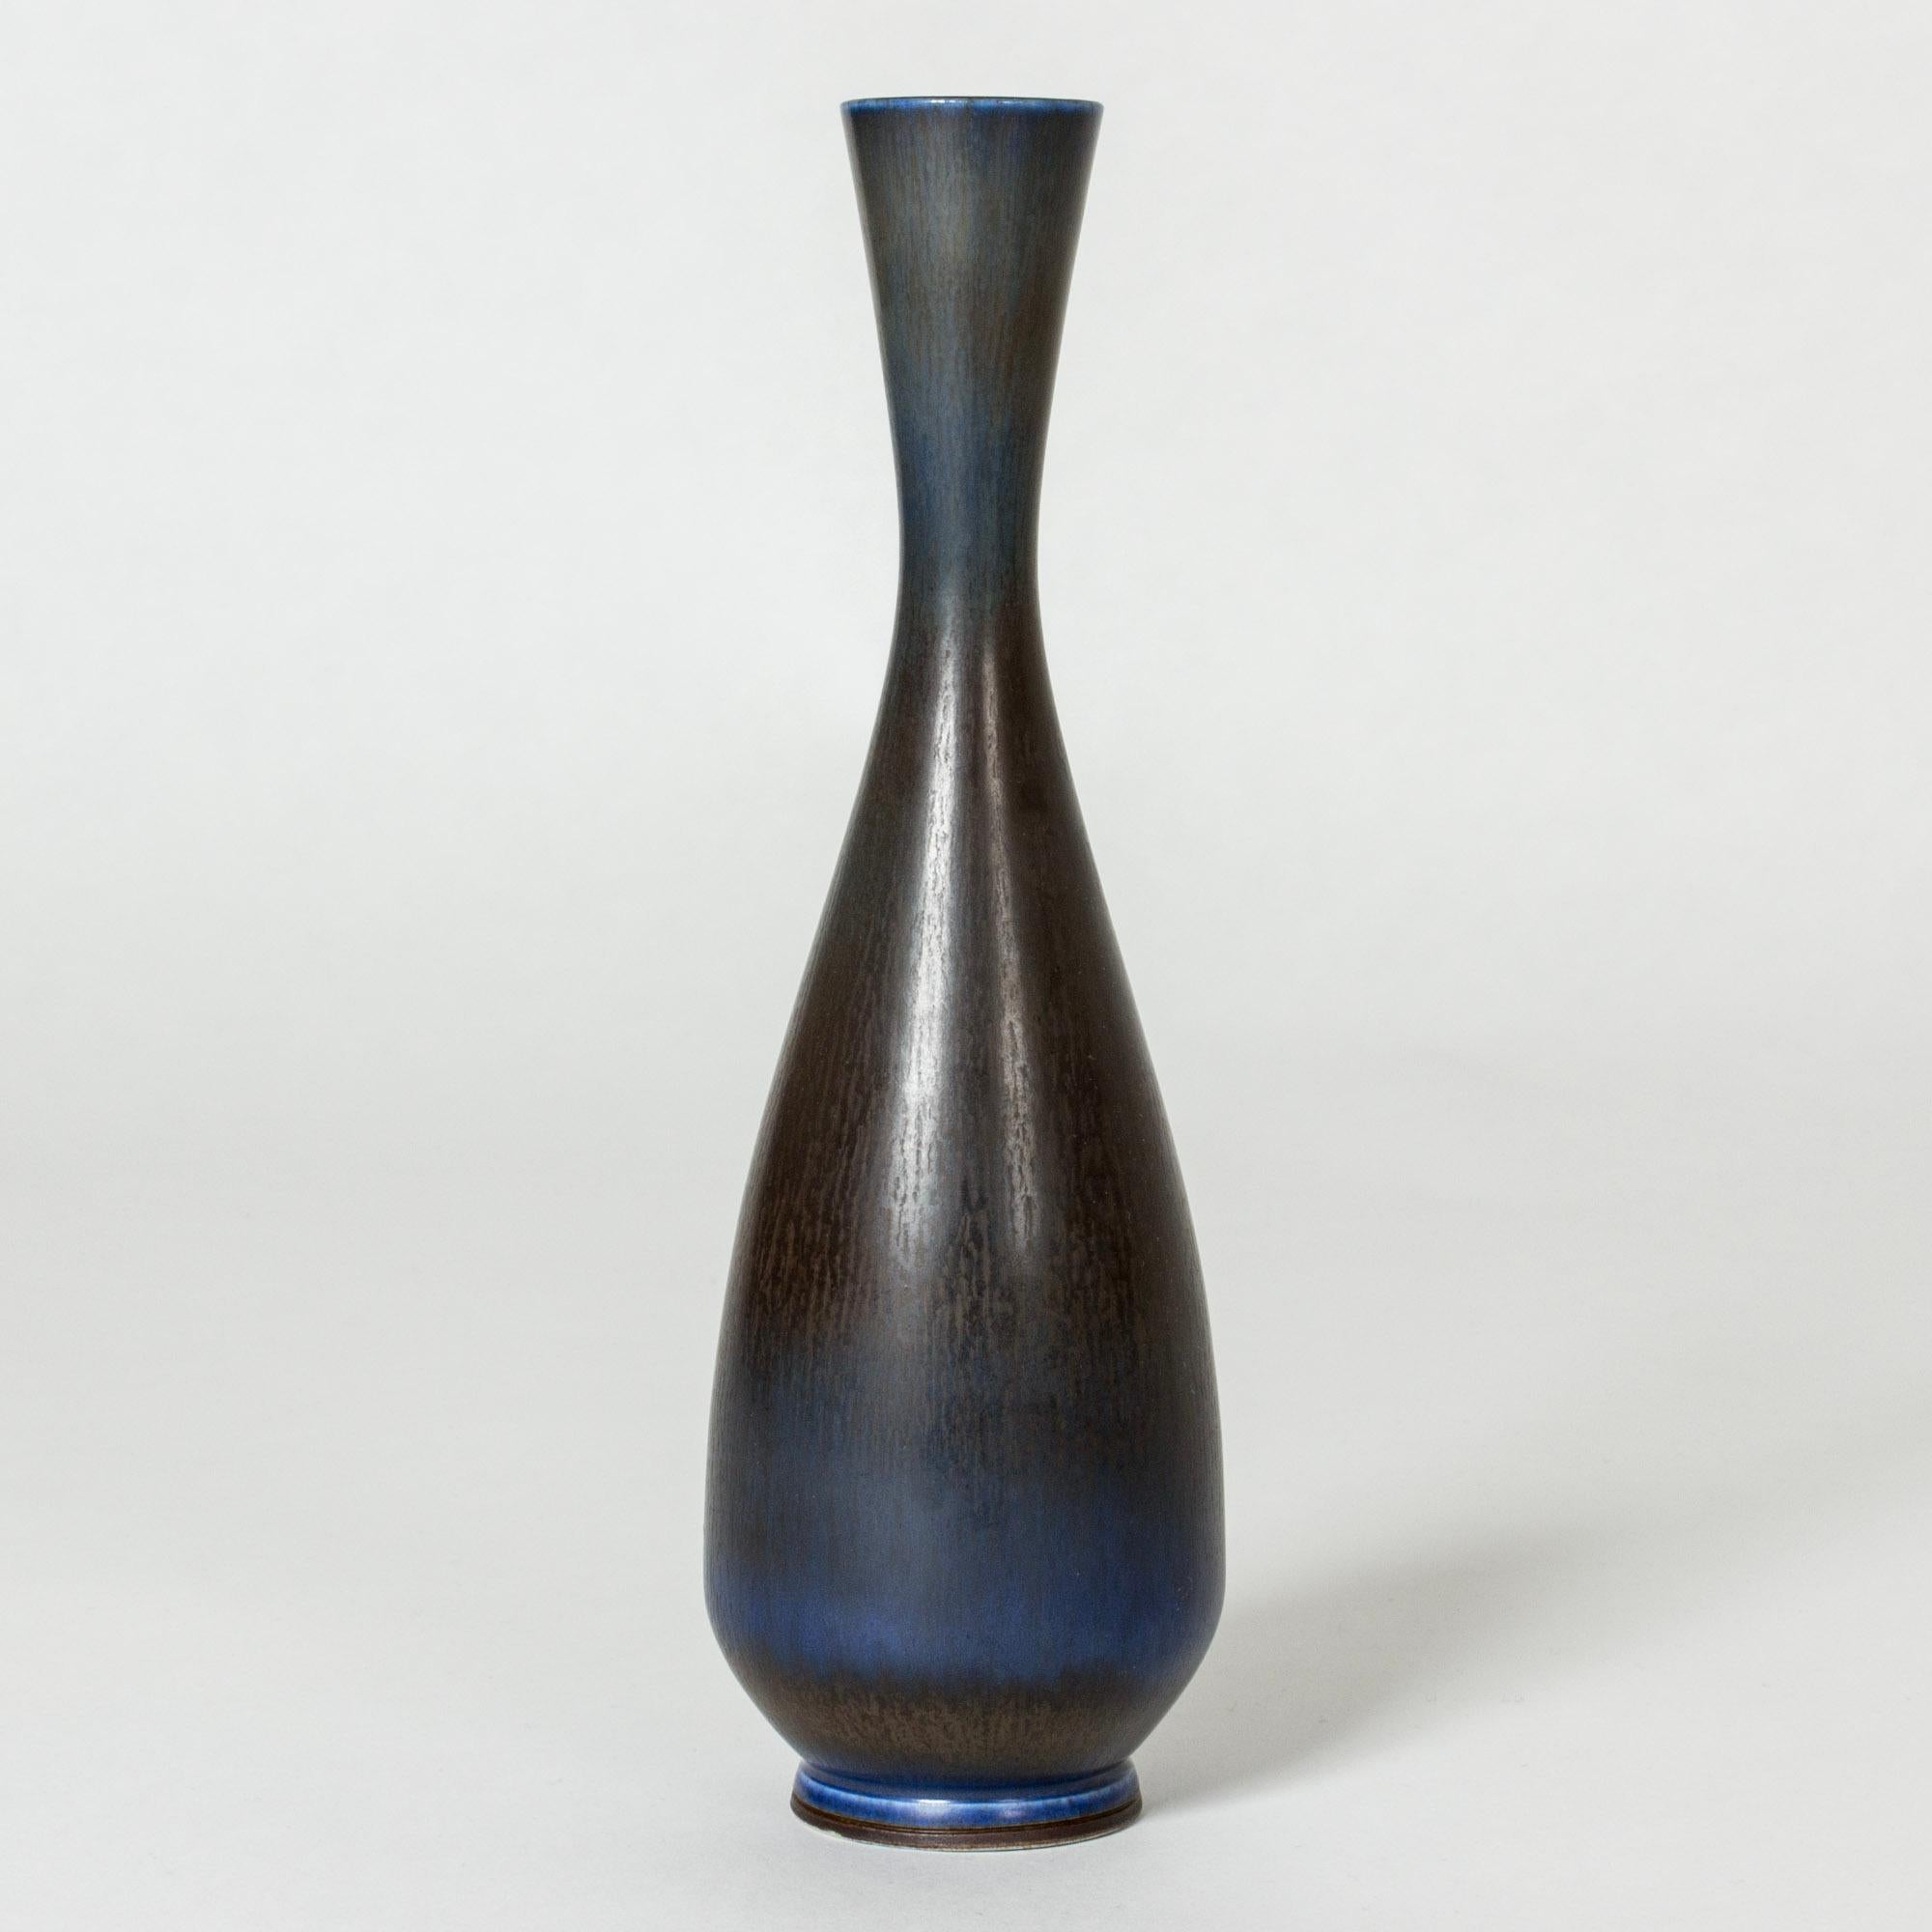 Stoneware vase by Berndt Friberg in a smooth form with some angularity. Vibrant dark blue hare’s fur glaze blending into dark brown.

Berndt Friberg was a Swedish ceramicist, renowned for his stoneware vases and vessels for Gustavsberg. His pure,